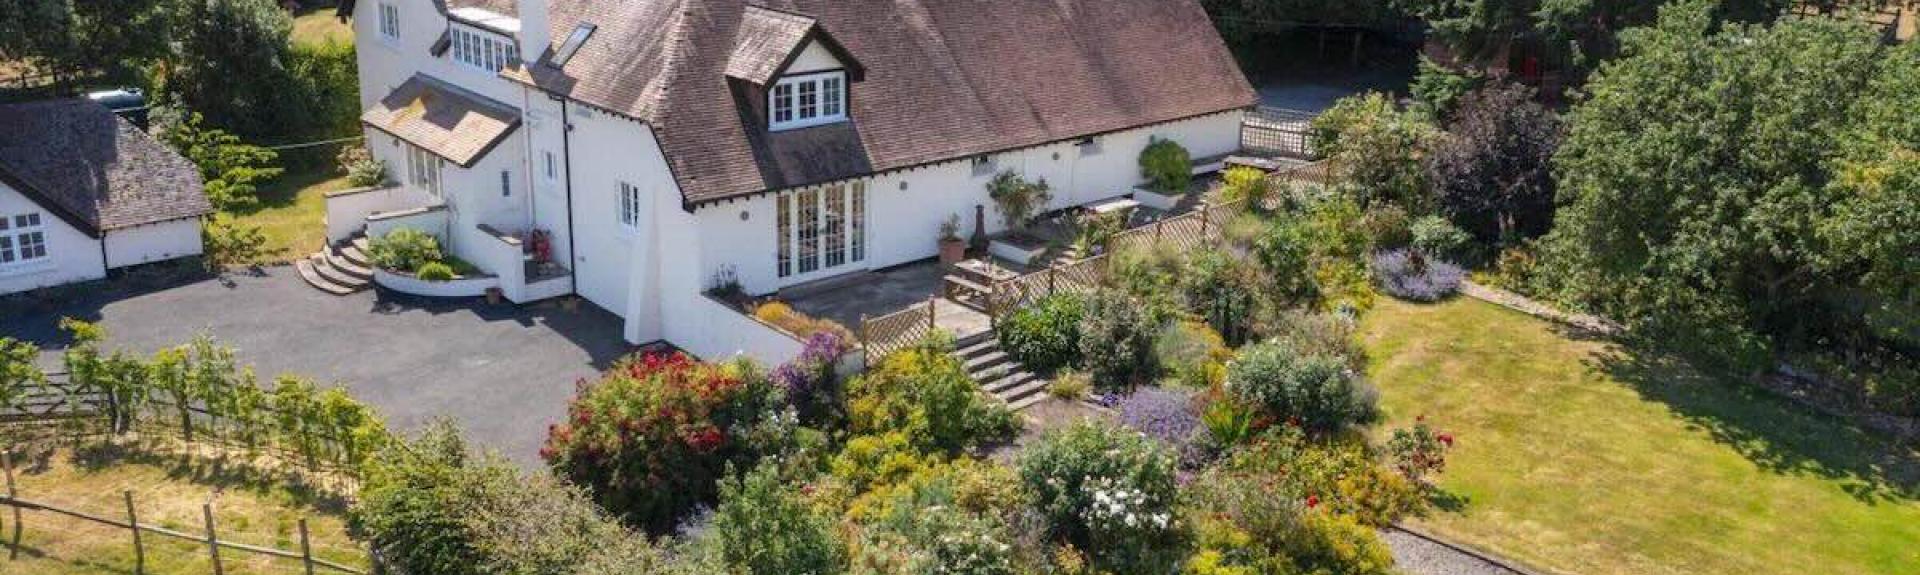 Aerial view of a large holiday cottage on the Somerset coast surrounded by gardens.